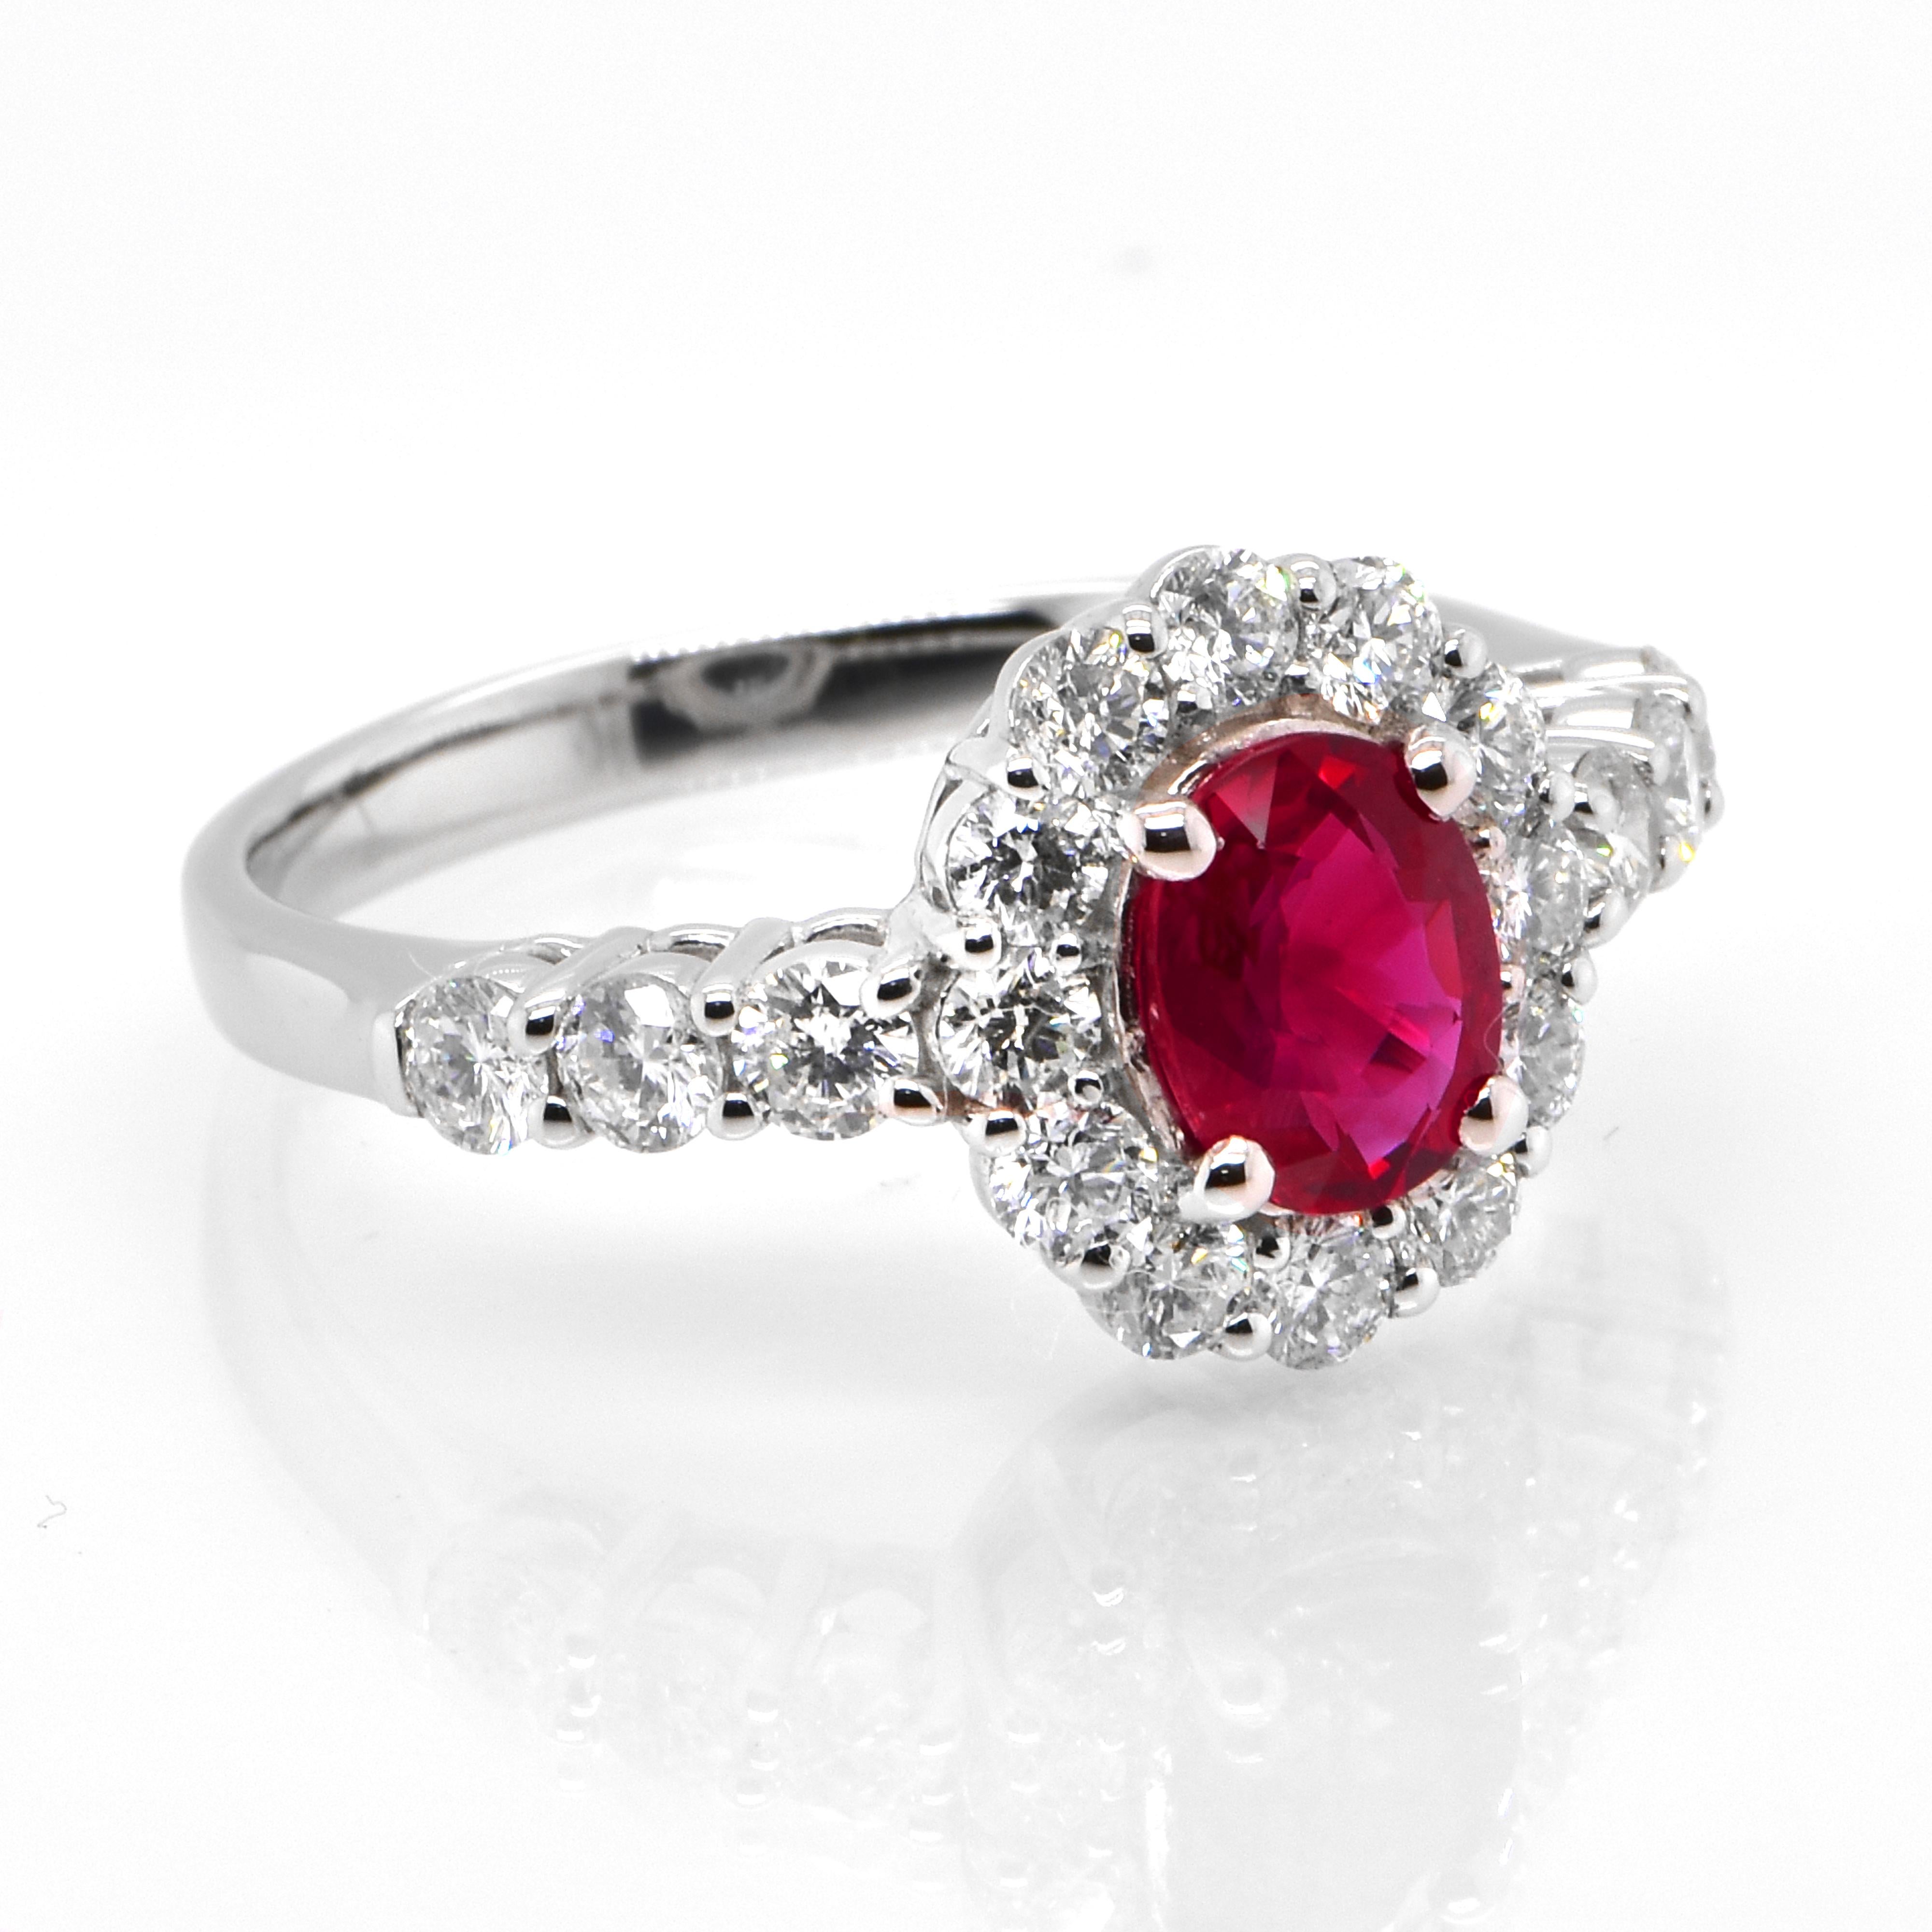 Modern GIA Certified 1.02 Carat Burmese Origin Ruby and Diamond Ring Made in Platinum For Sale